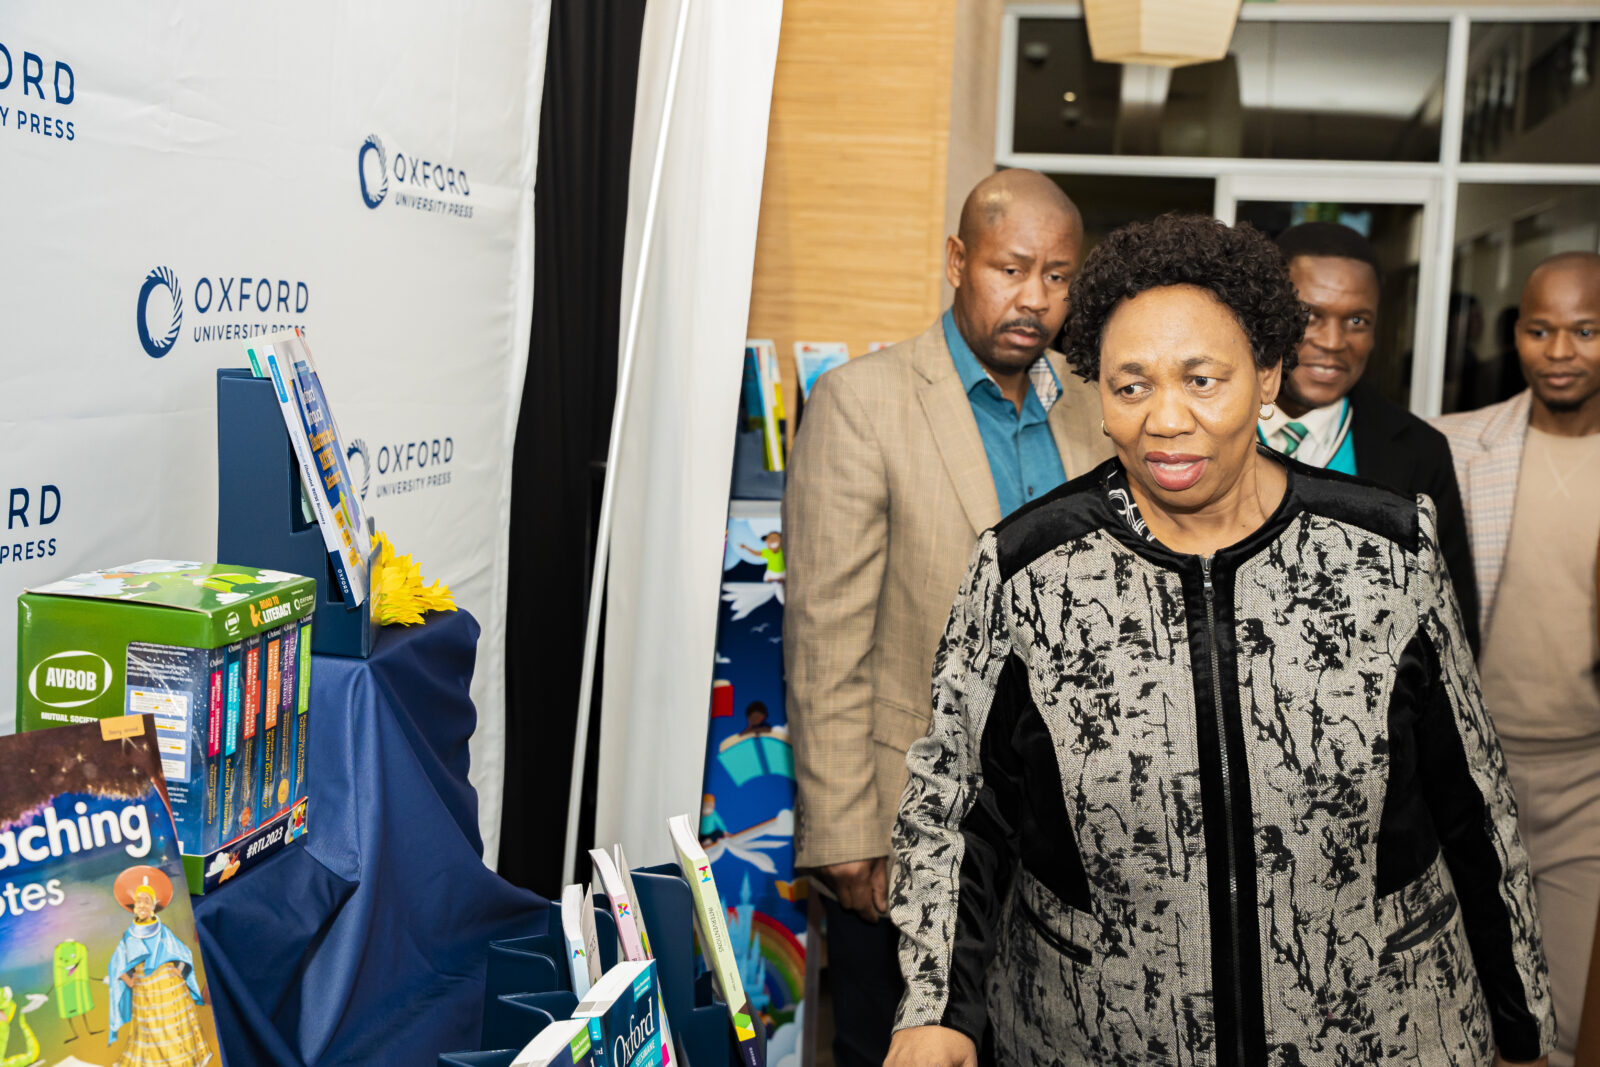 South African Minister of Basic Education Angie Motshekga looks at some of the books distributed for the Road to Literacy Campaign